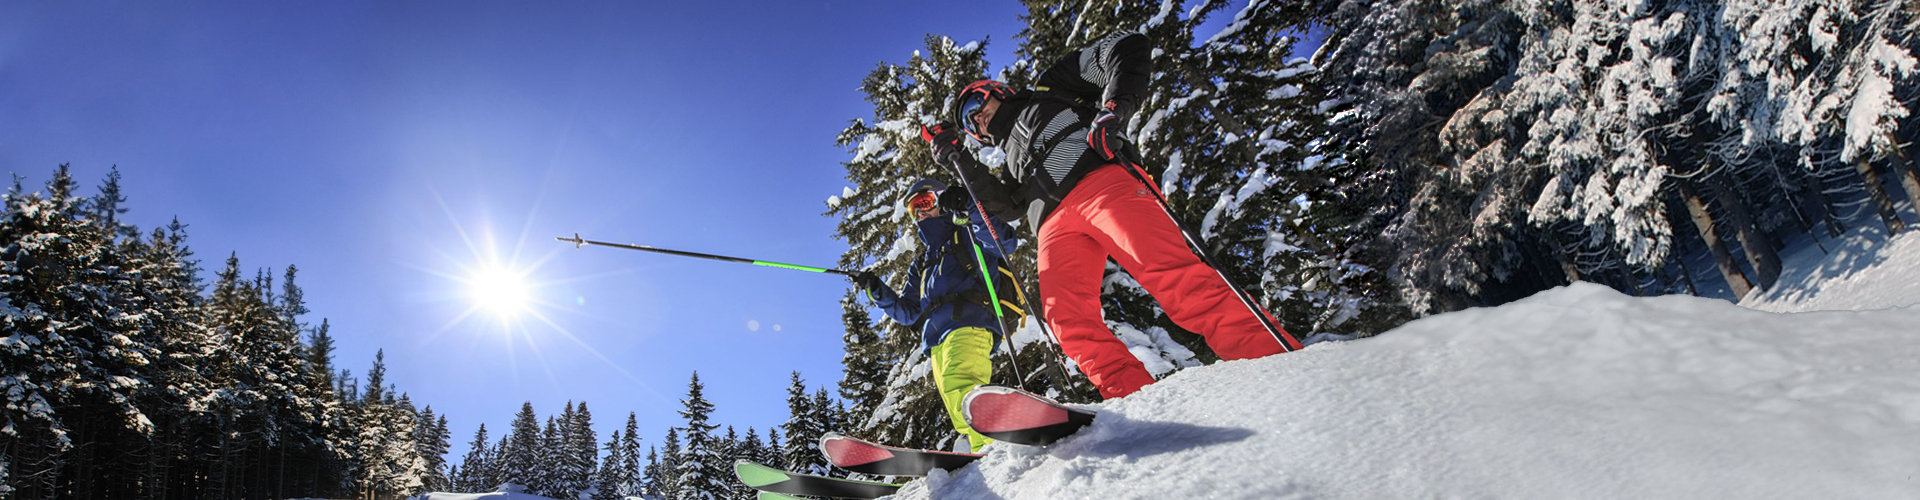 Ski school for adults, ski lessons for adults